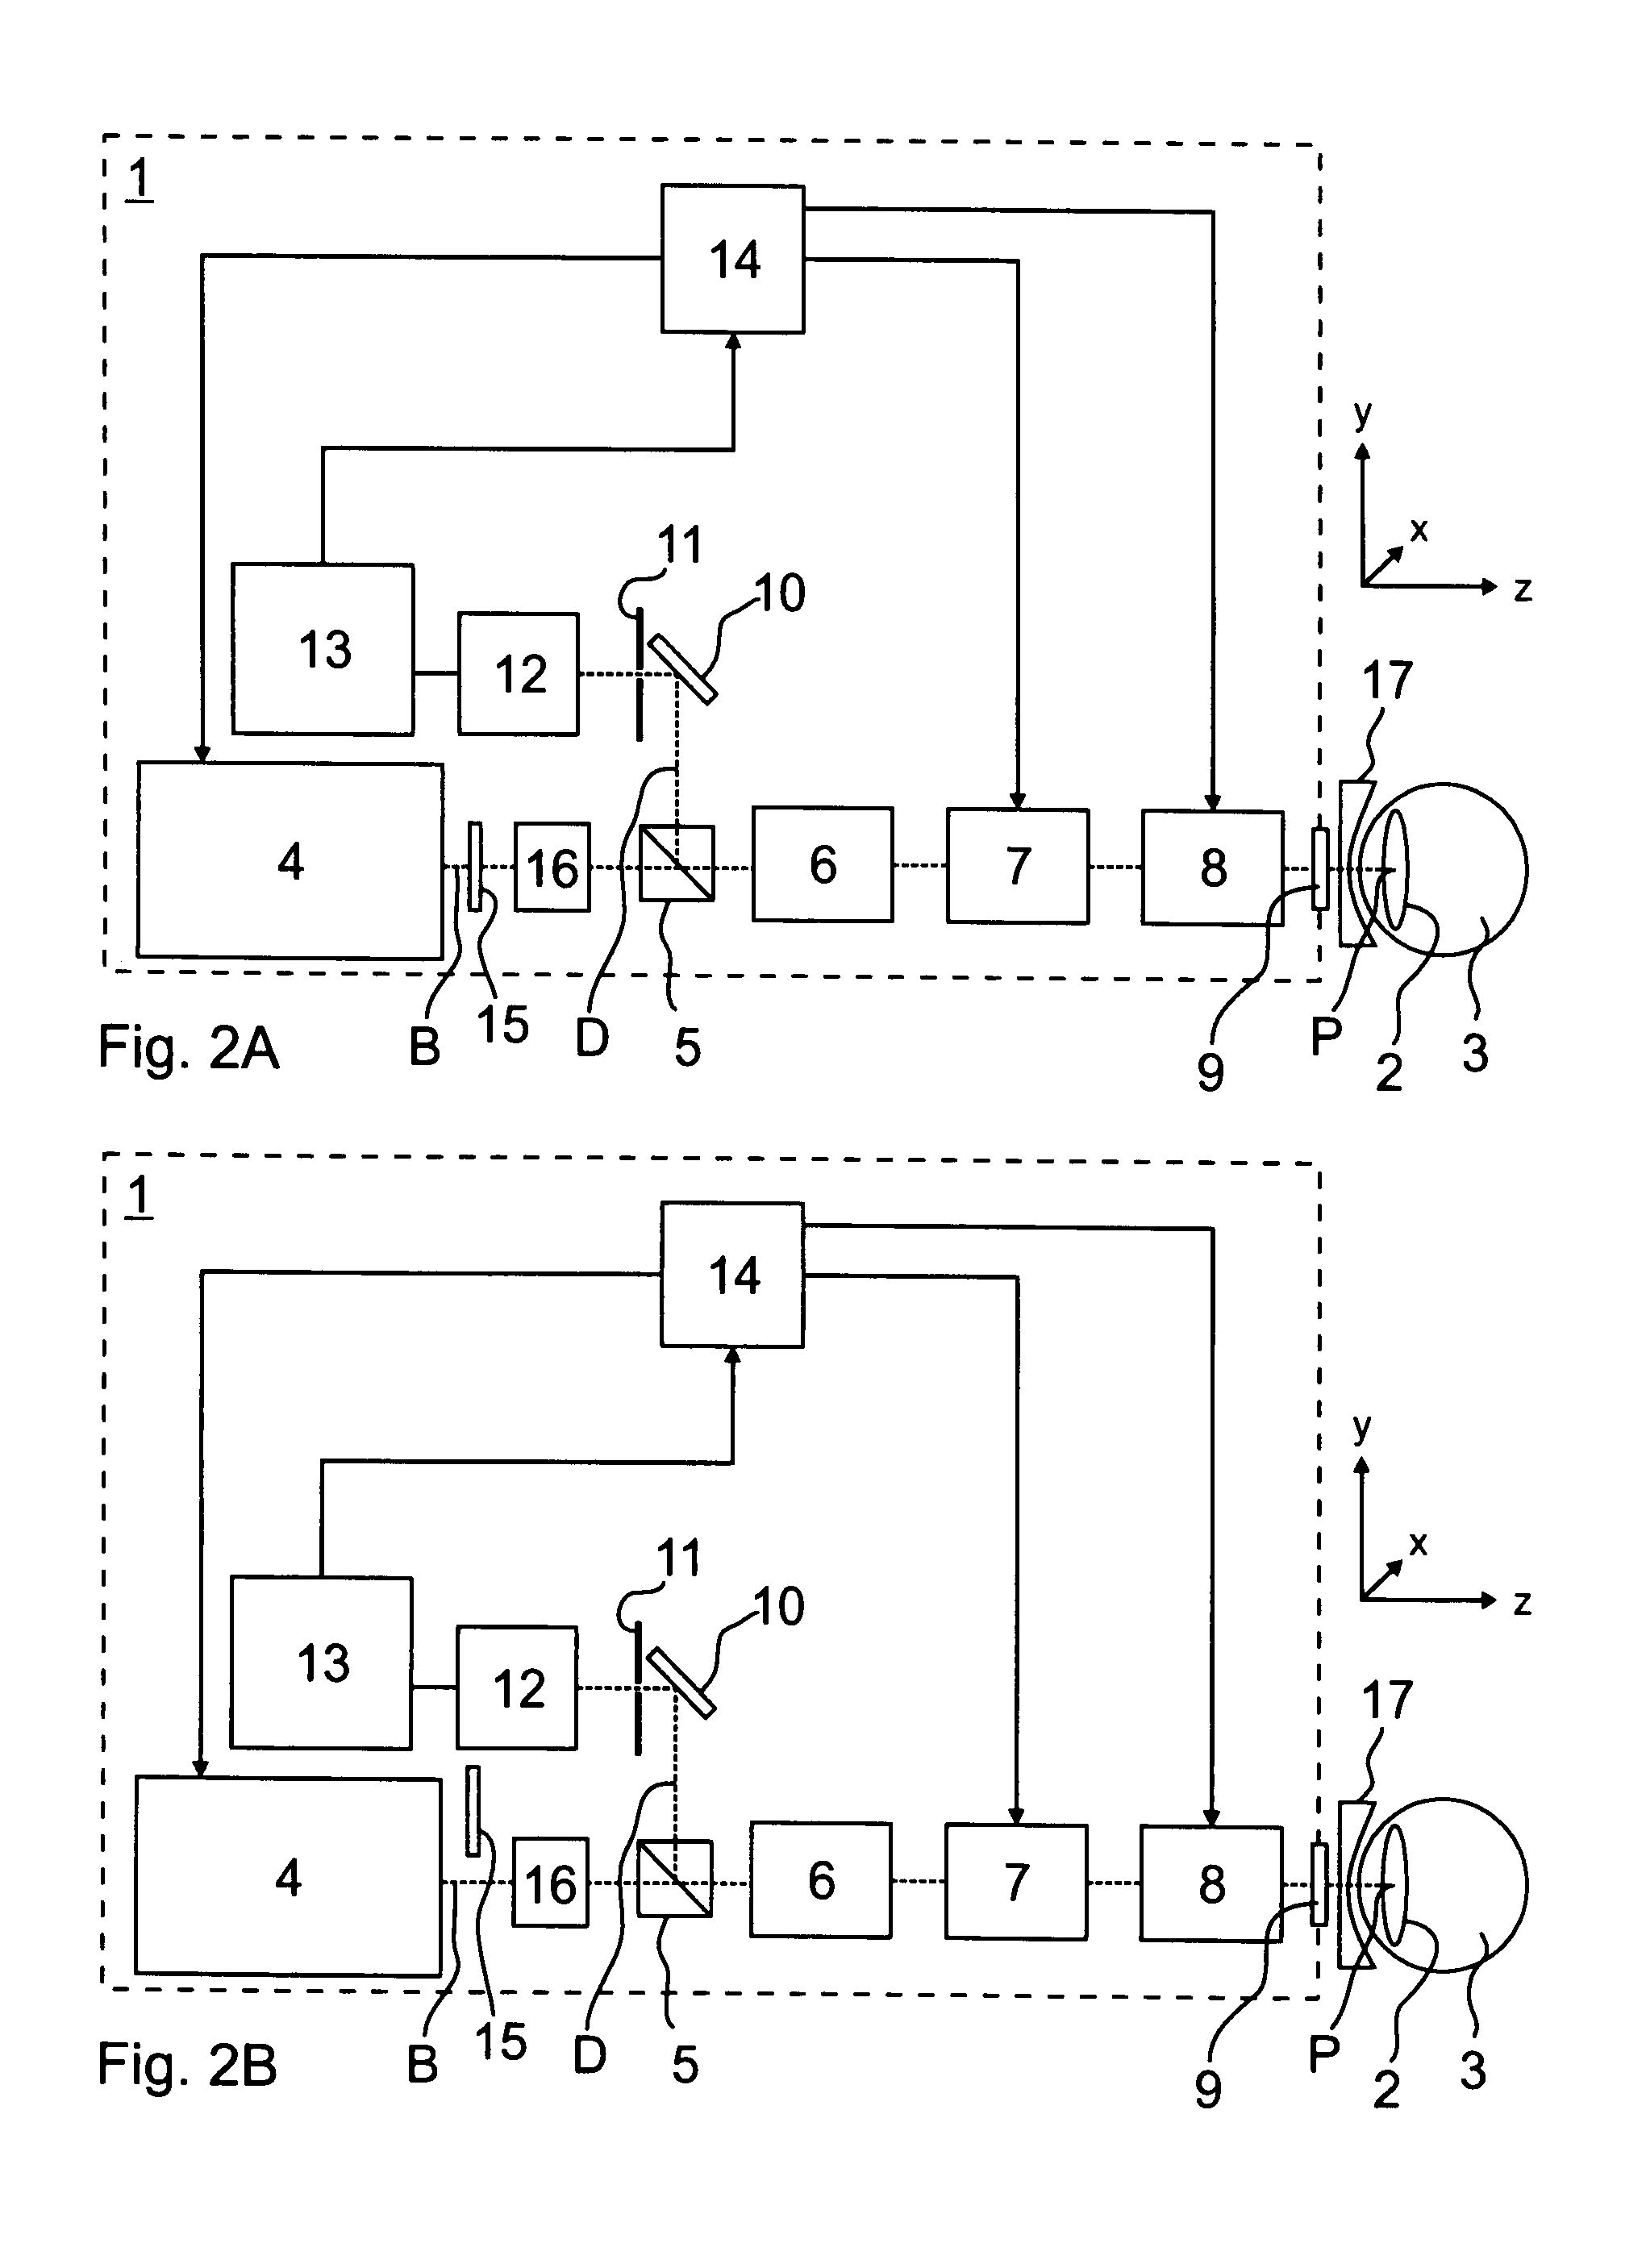 Ophthalmological laser system and operating method